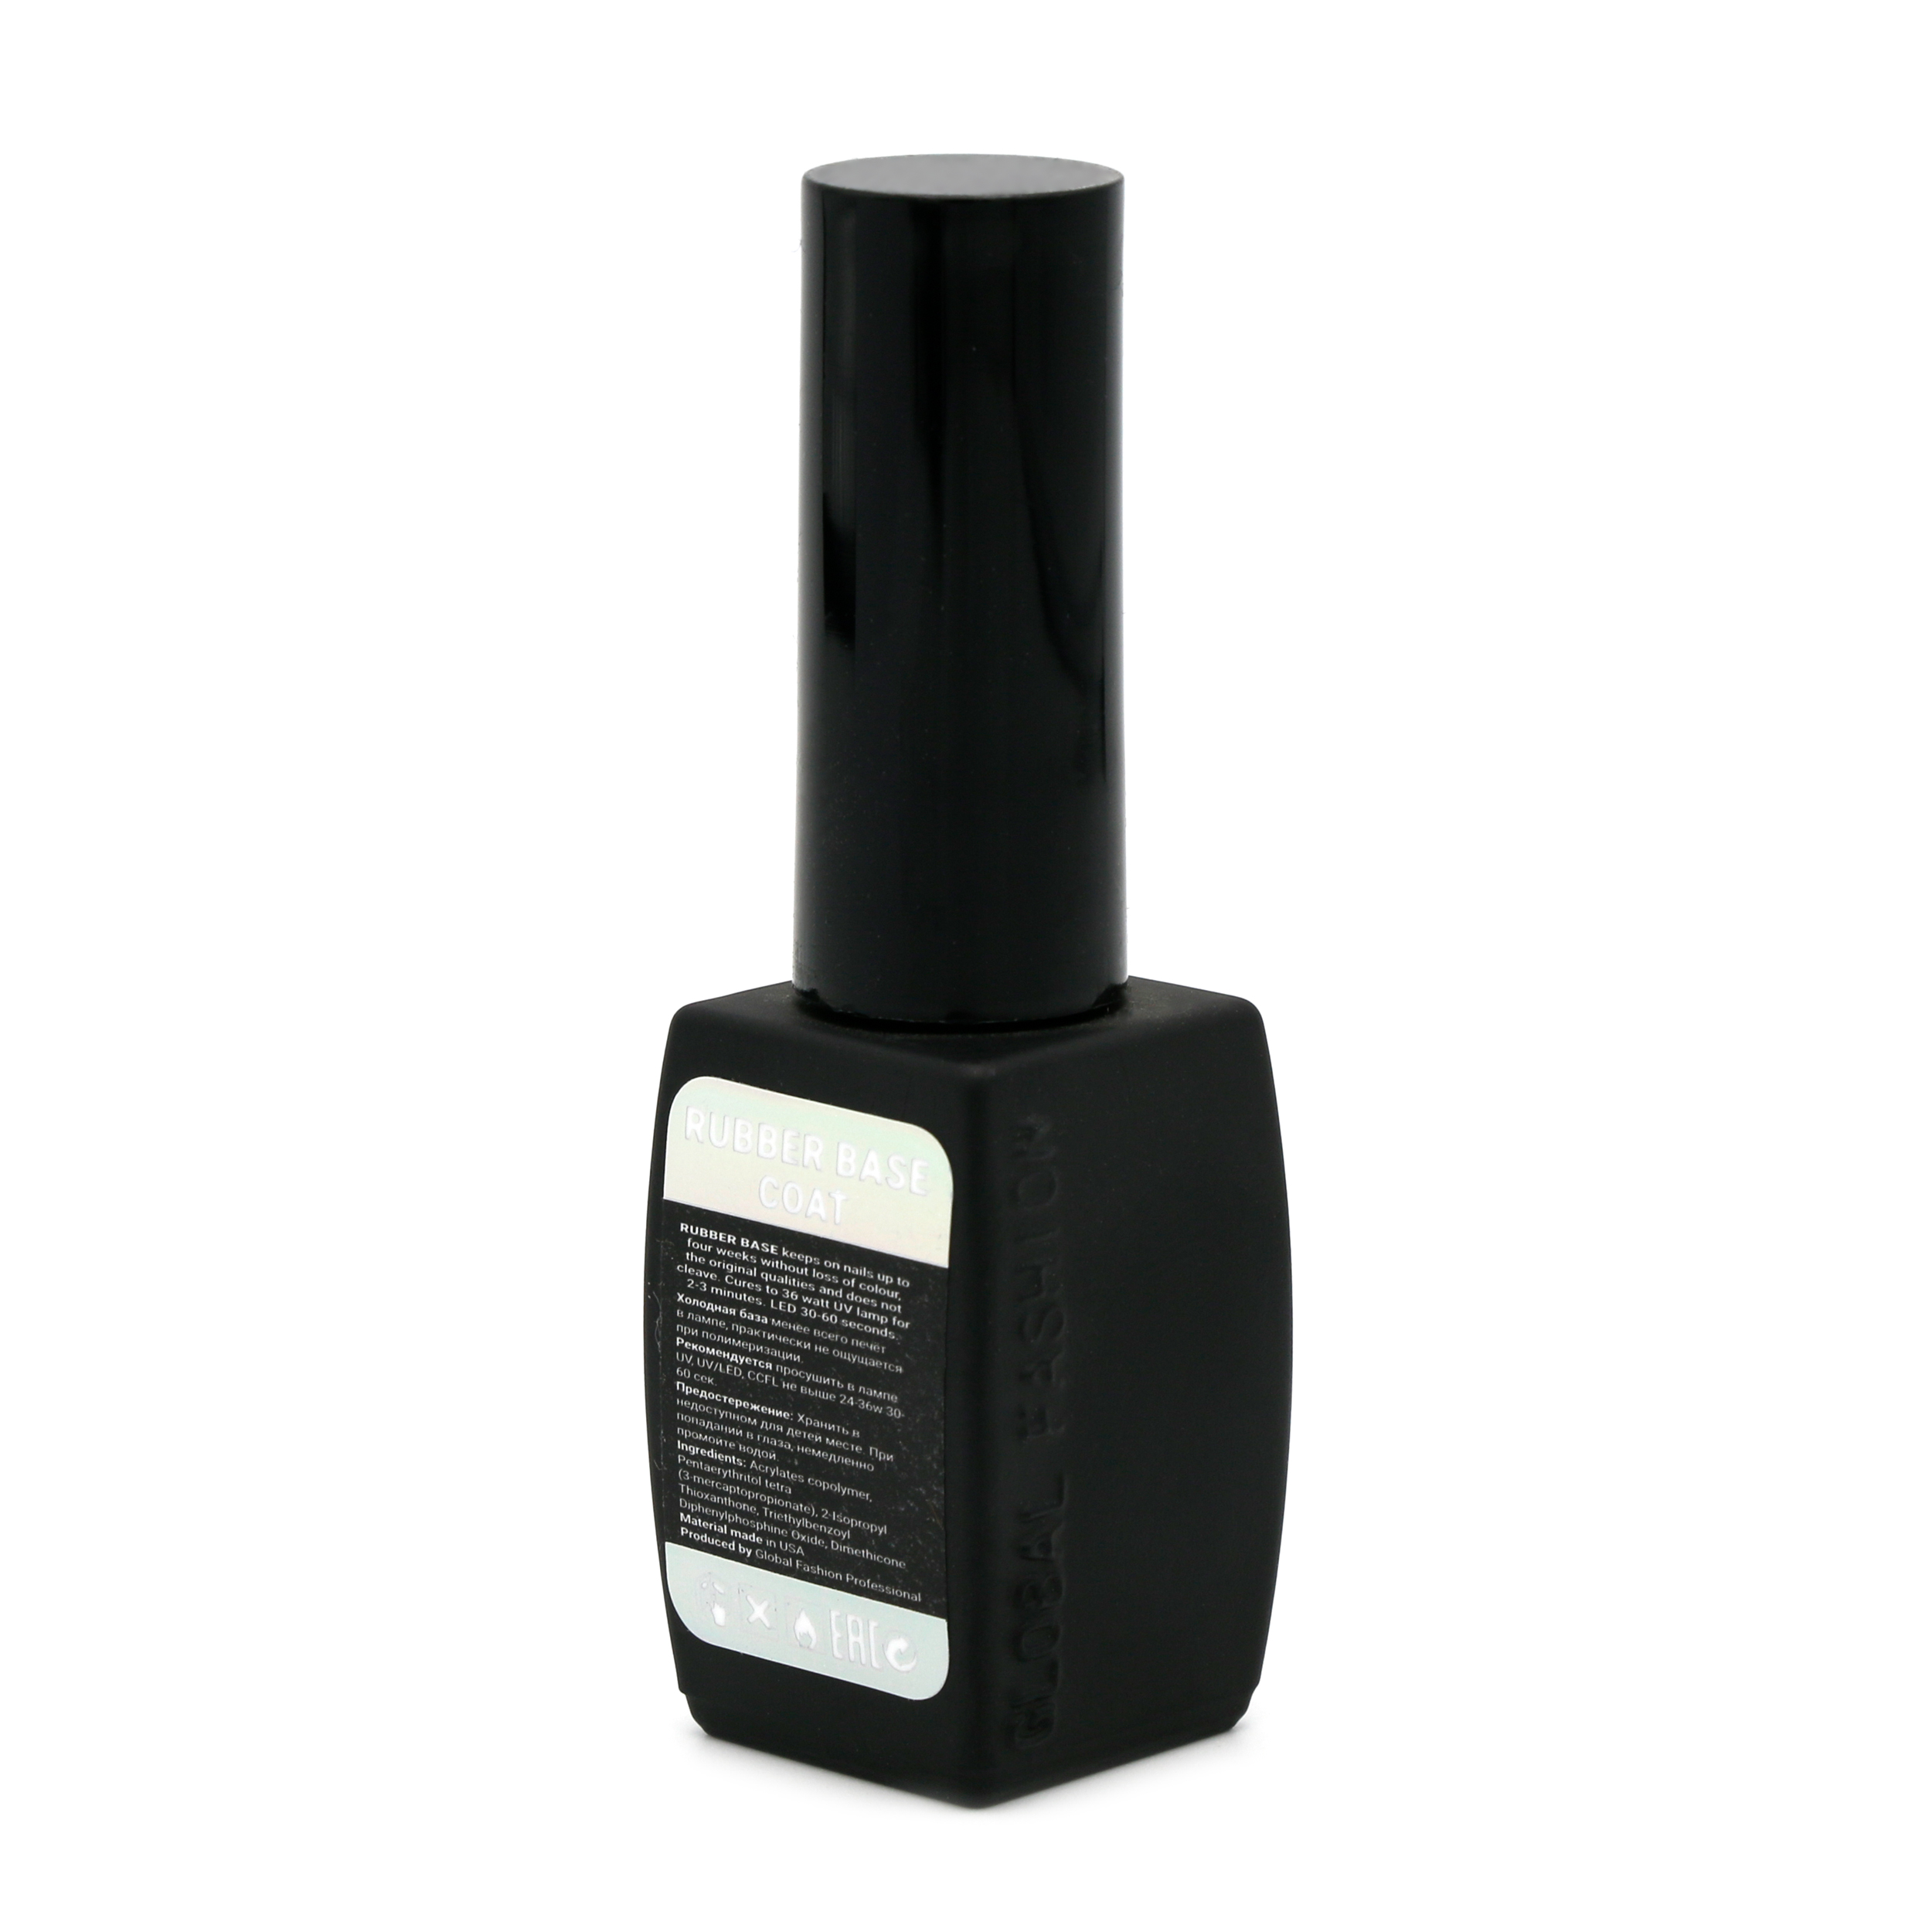 Get Easy to Apply Rubber Base Coat French by Global Fashion